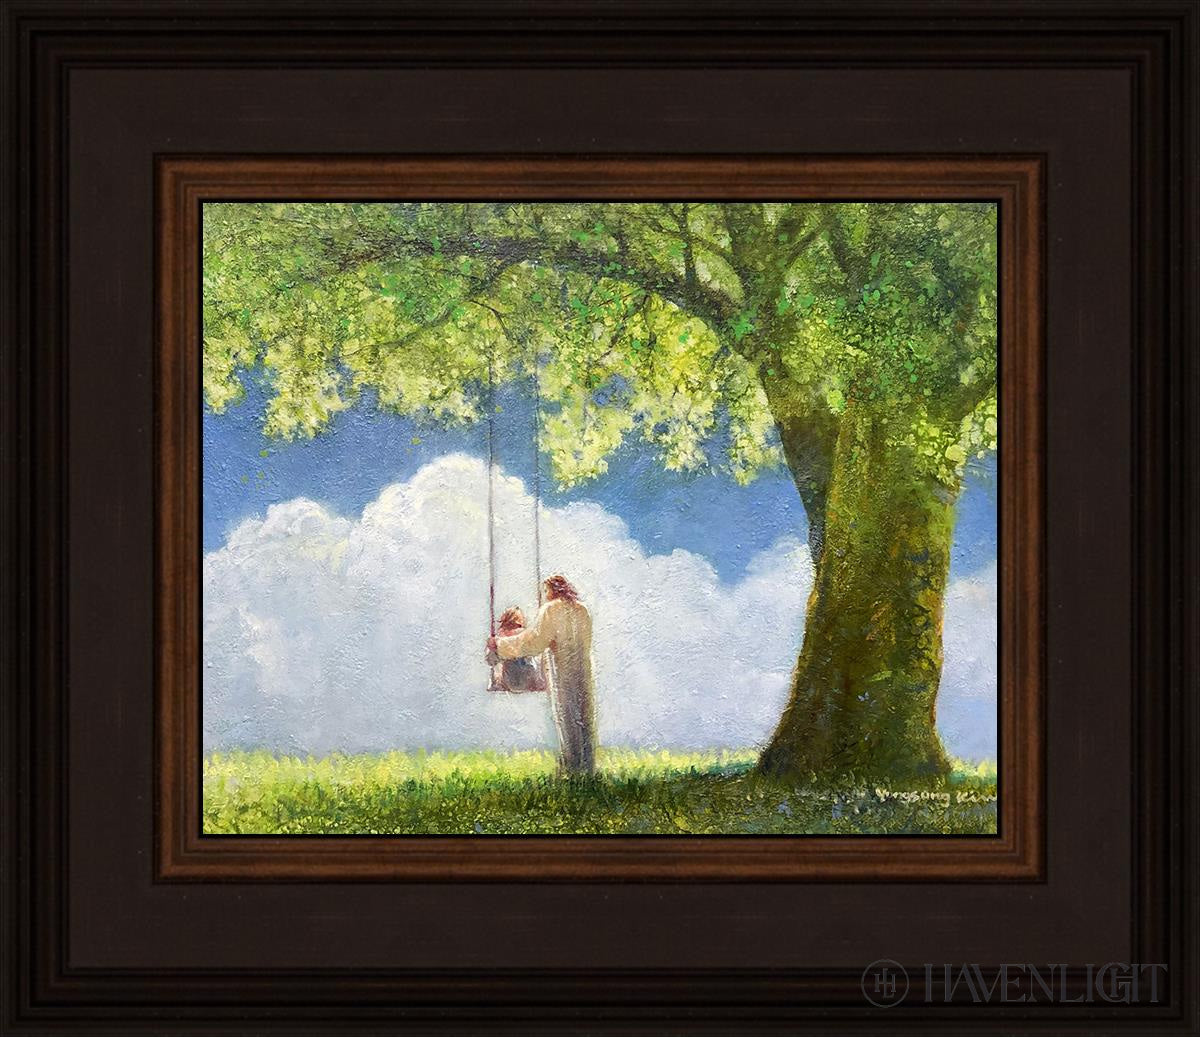 The Greatest In Kingdom Of Heaven Open Edition Print / 10 X 8 Brown 14 3/4 12 Art